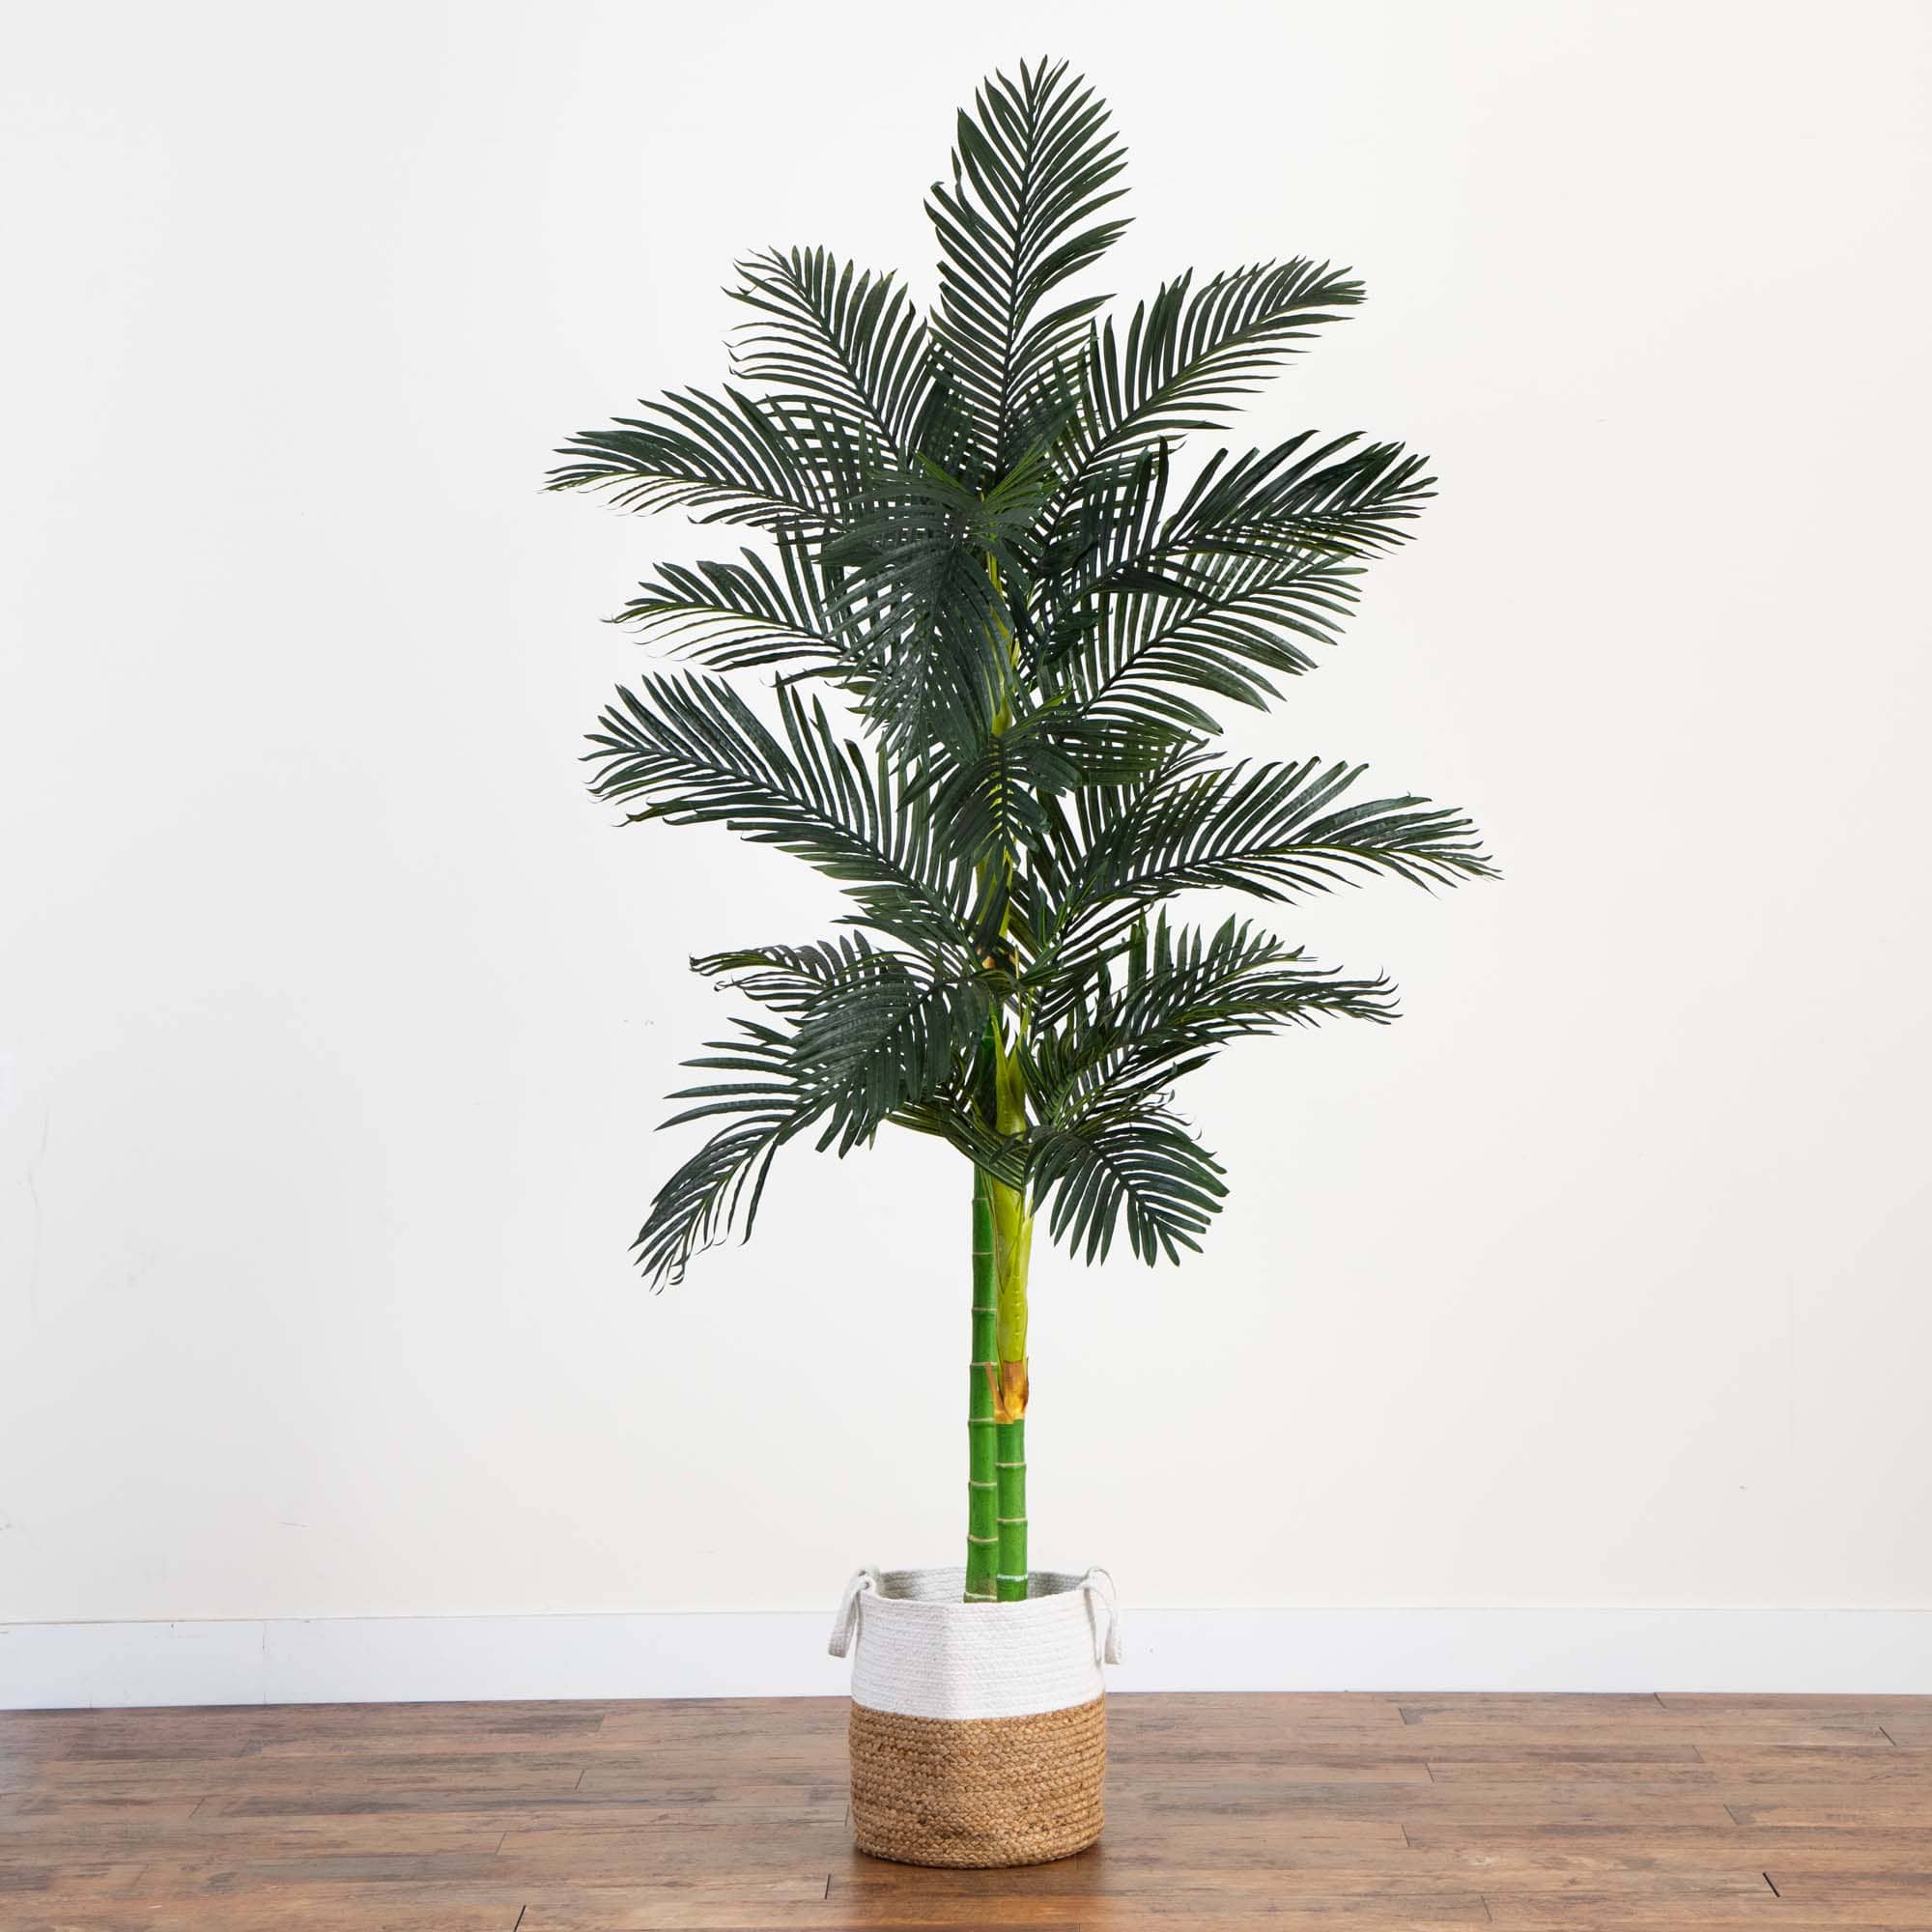 8ft. Golden Cane Palm Tree in Handmade Natural Cotton Planter